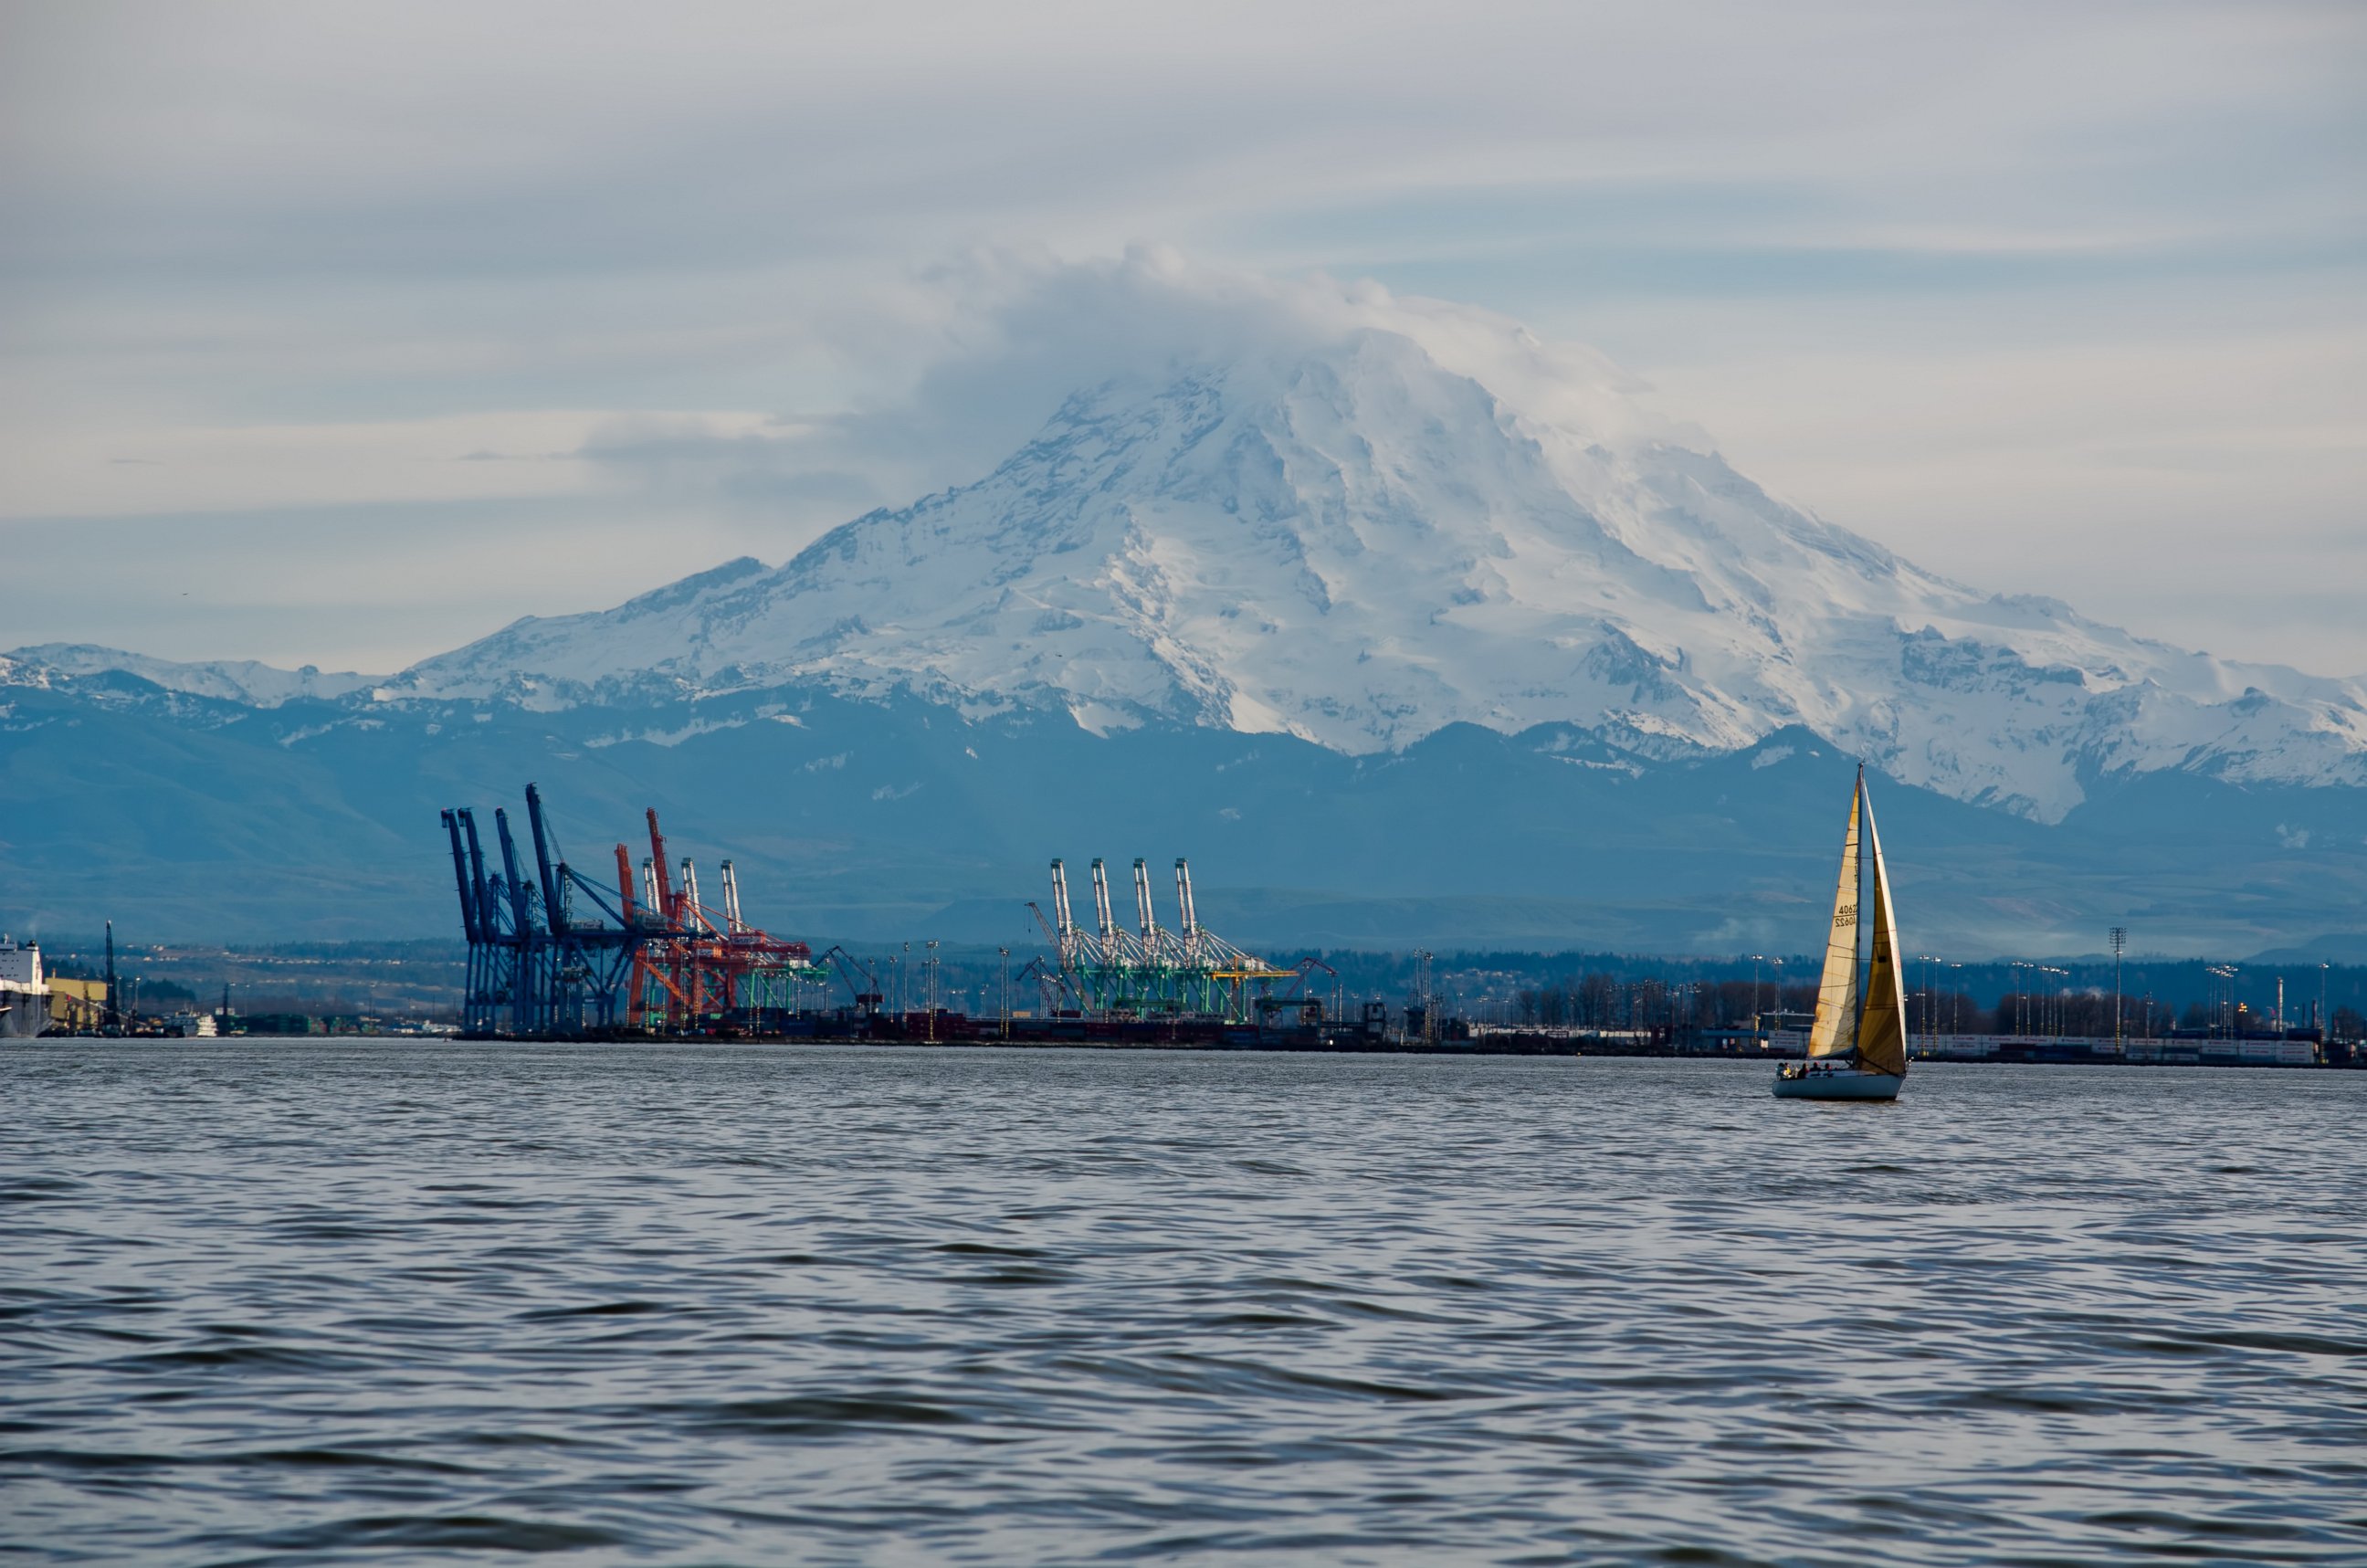 PHOTO: An image from 2012 shows the Port of Tacoma seaport in Tacoma, Wash. with Mt. Rainier in the background. 